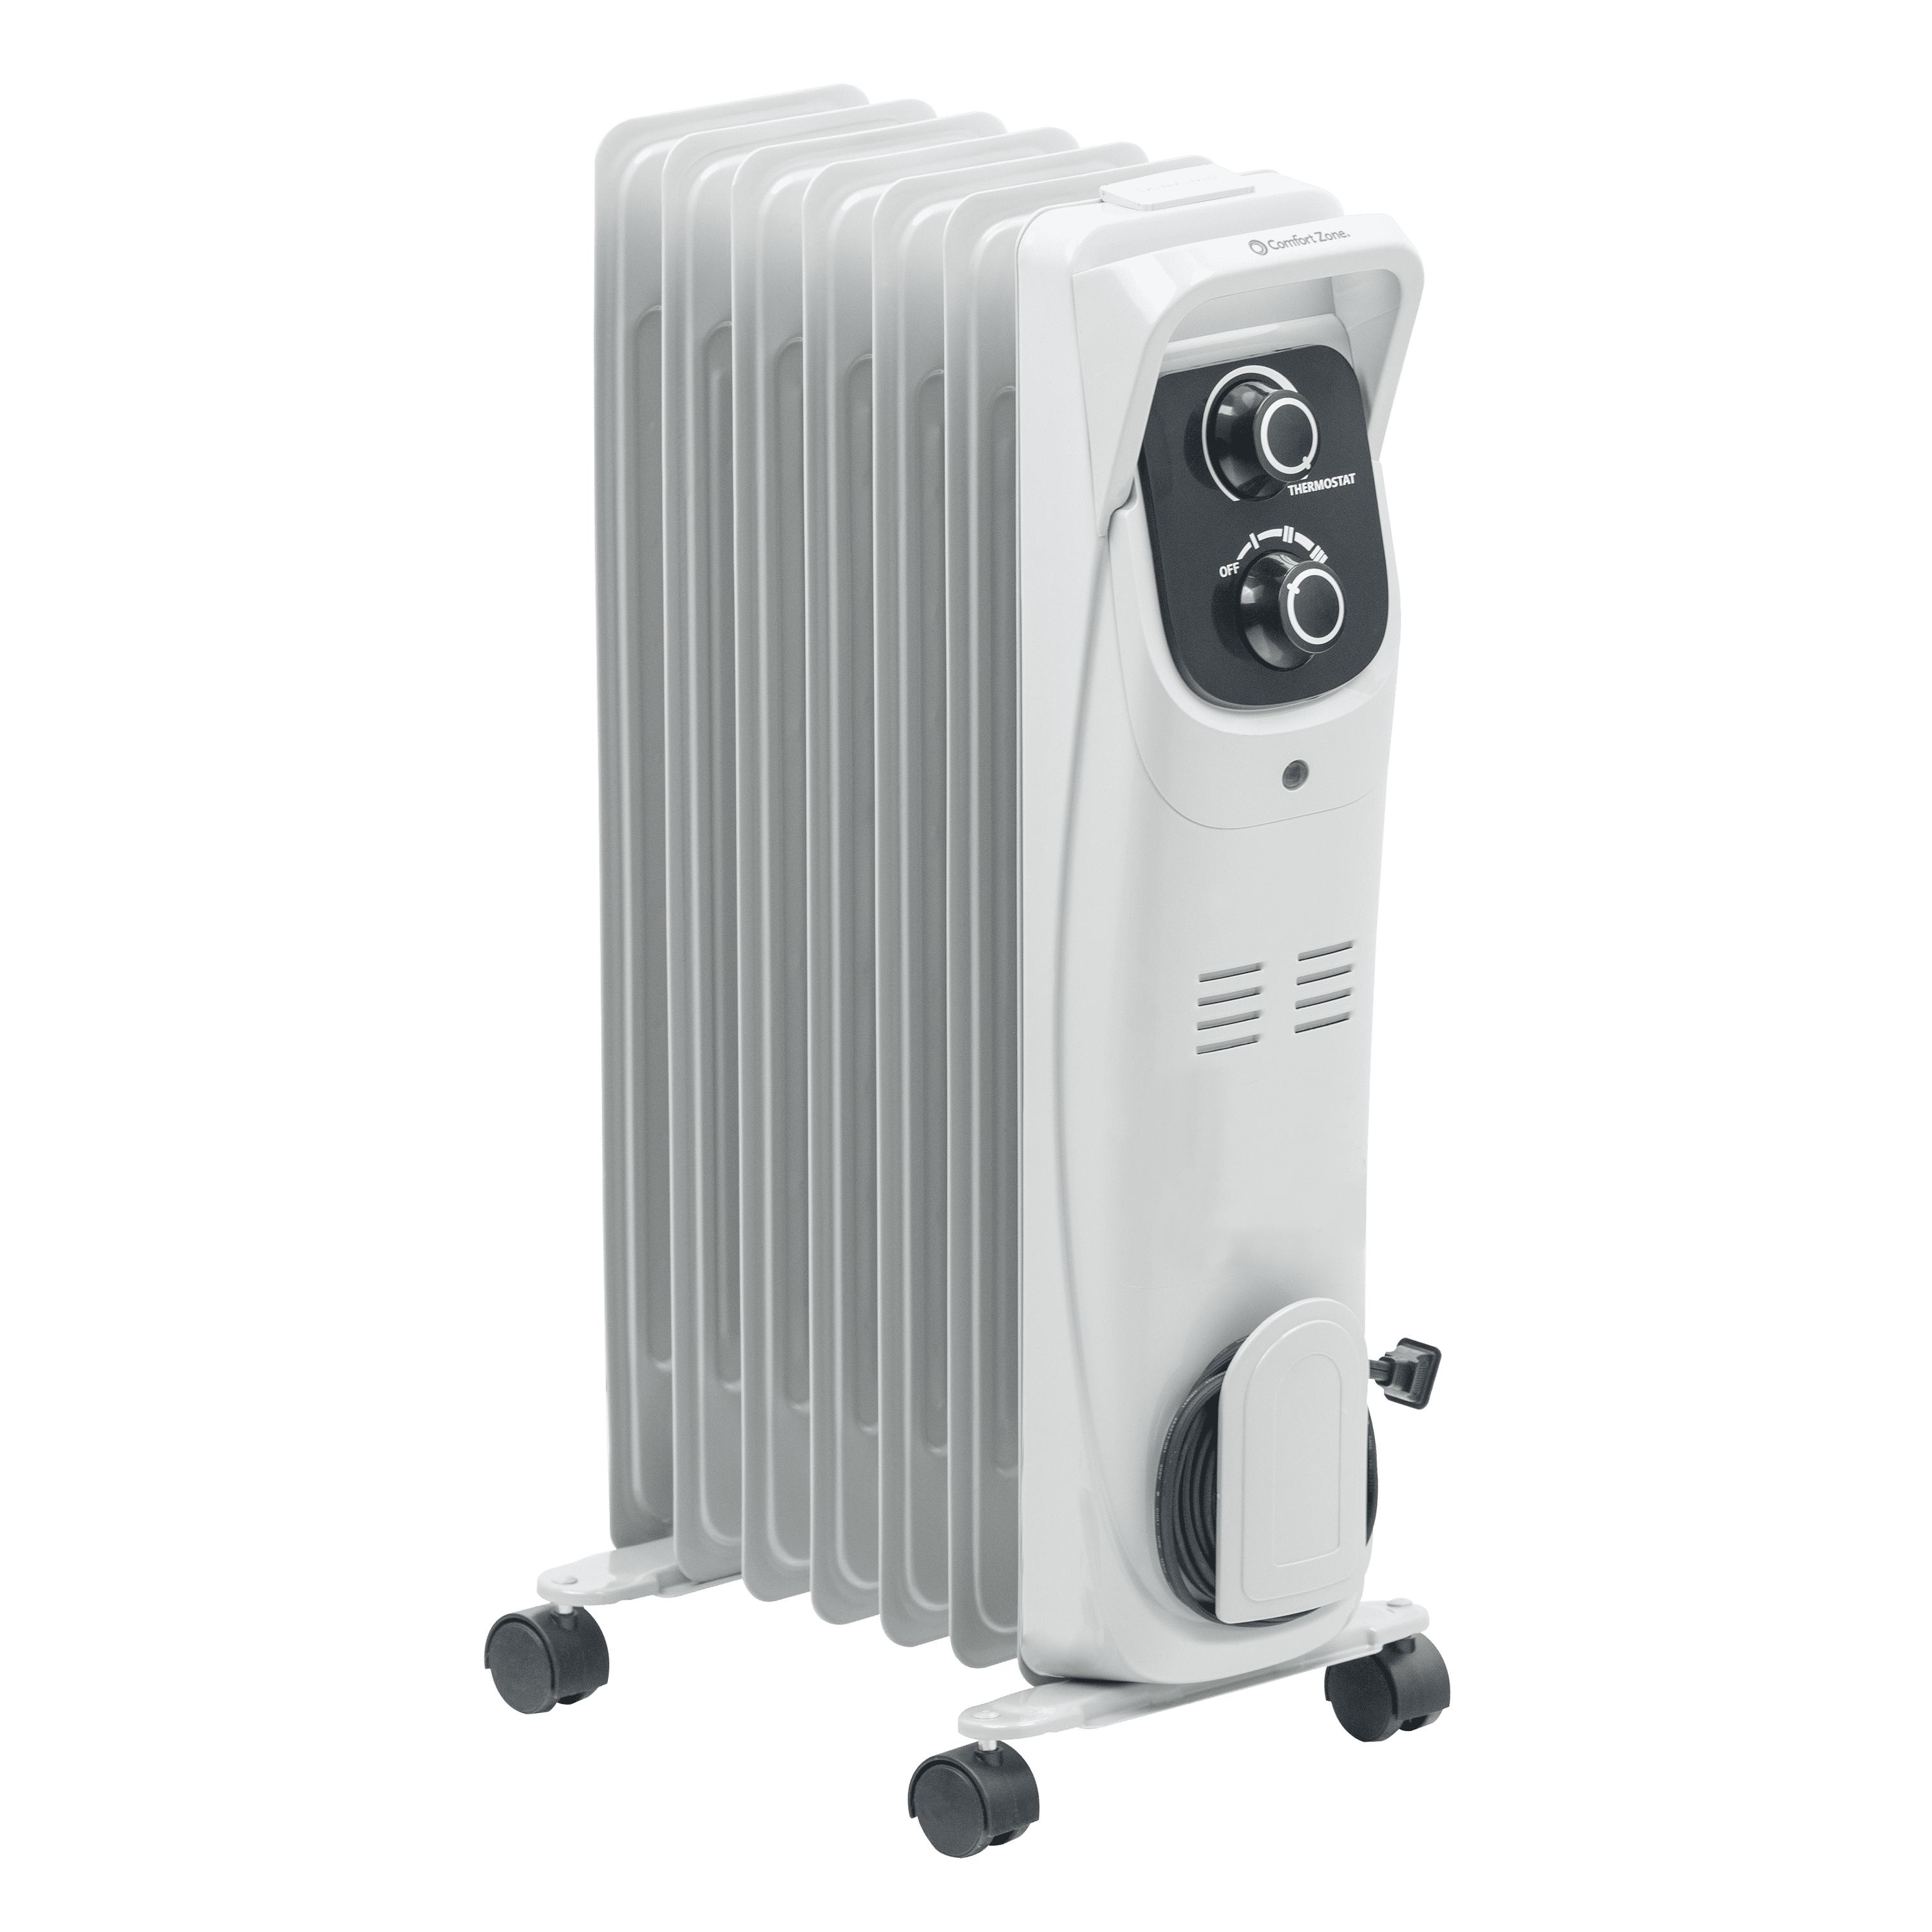 zone Uitsluiting Dollar Comfort Zone 1,500-Watt Oil-Filled Electric Space Heater Radiator with  Silent Operation , White - Walmart.com